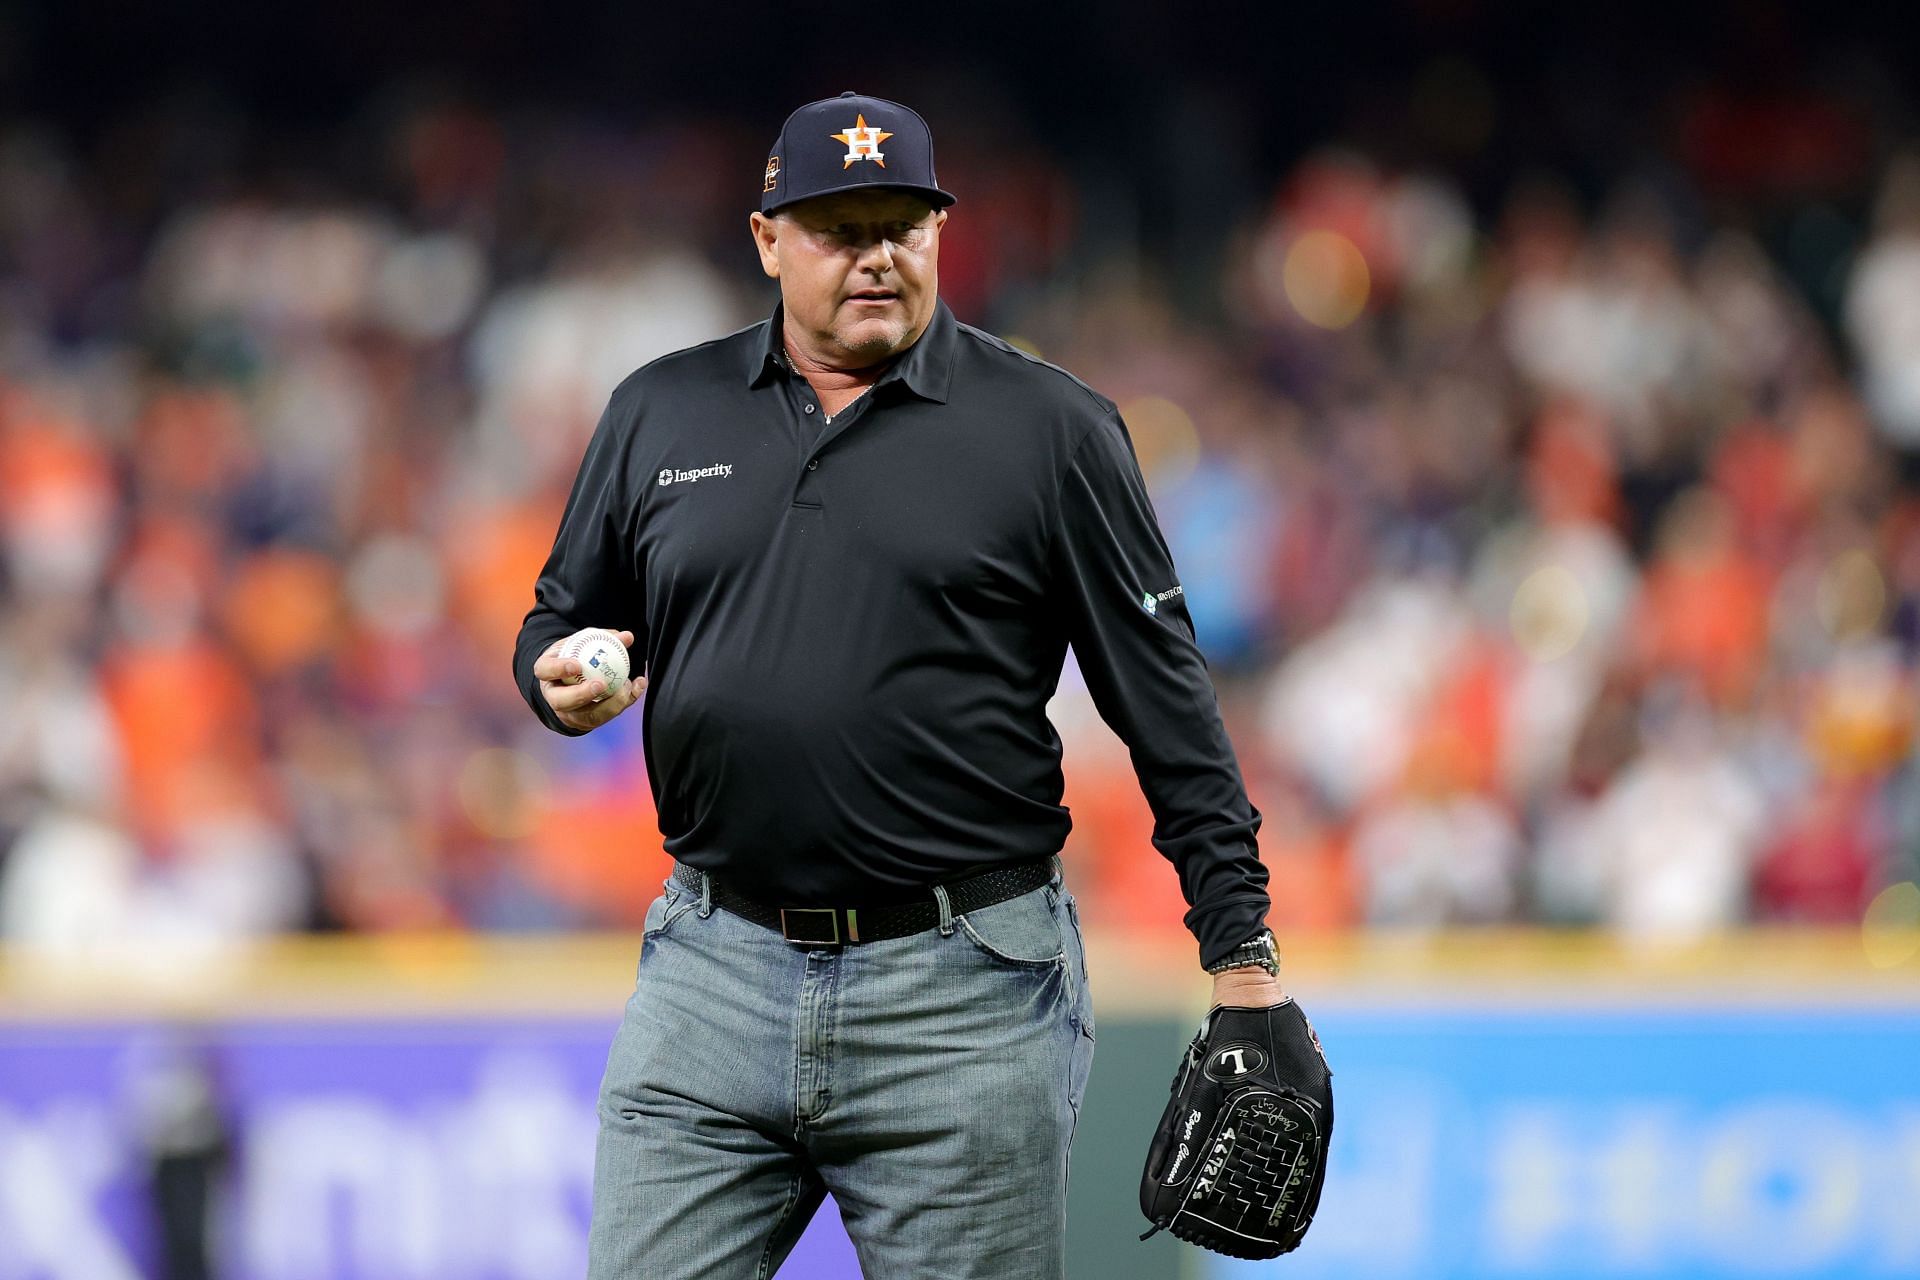 Former Houston Astros pitcher Roger Clemens throws out the first pitch before the game against the New York Yankees at Minute Maid Park on October 19, 2022 in Houston, Texas